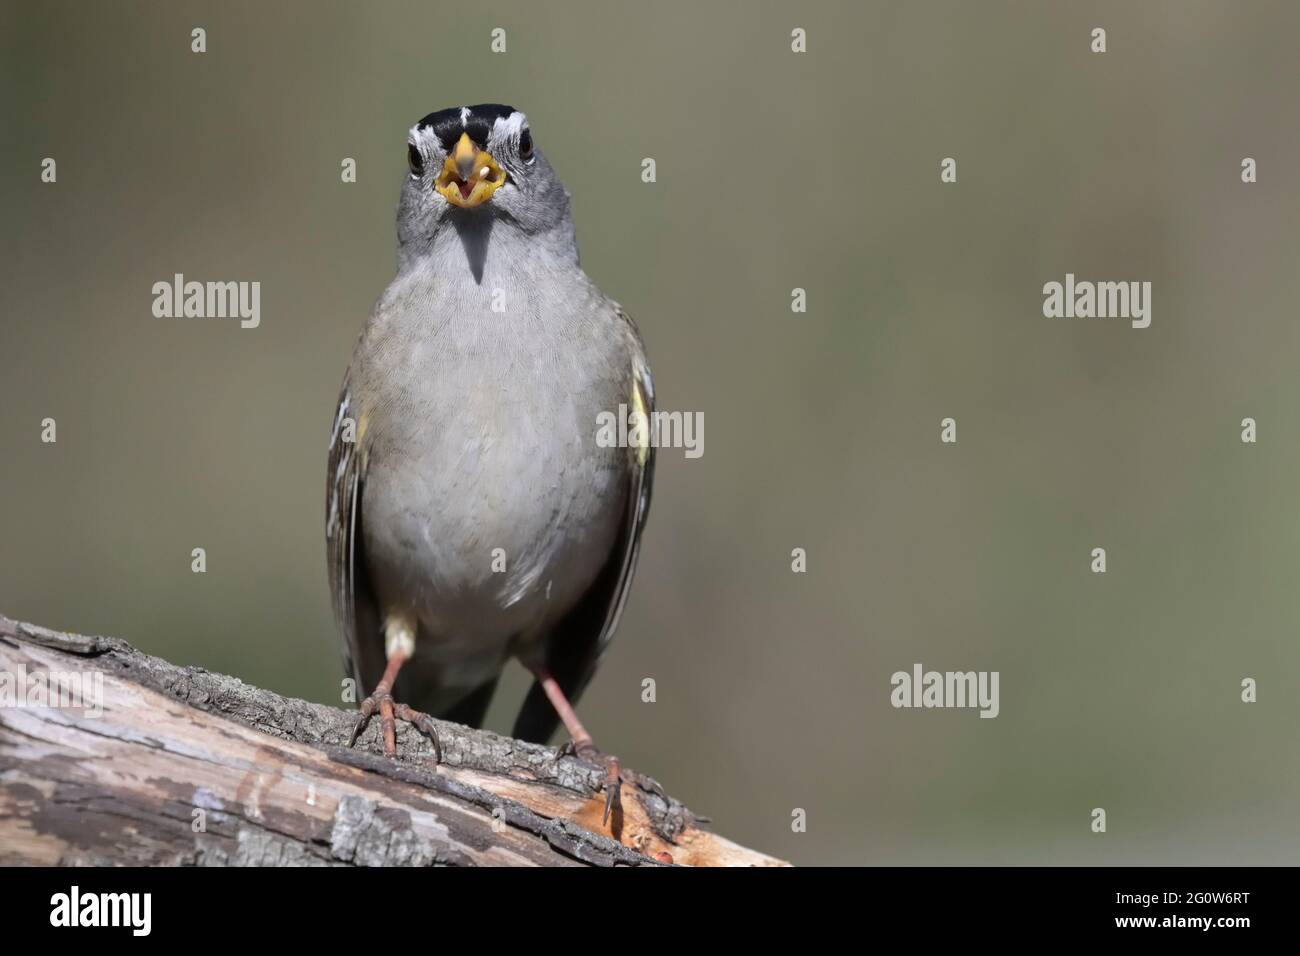 White  crowned sparrow at a bird feeder Courtenay  Vancouver Island,  British Columbia, Canada. Stock Photo